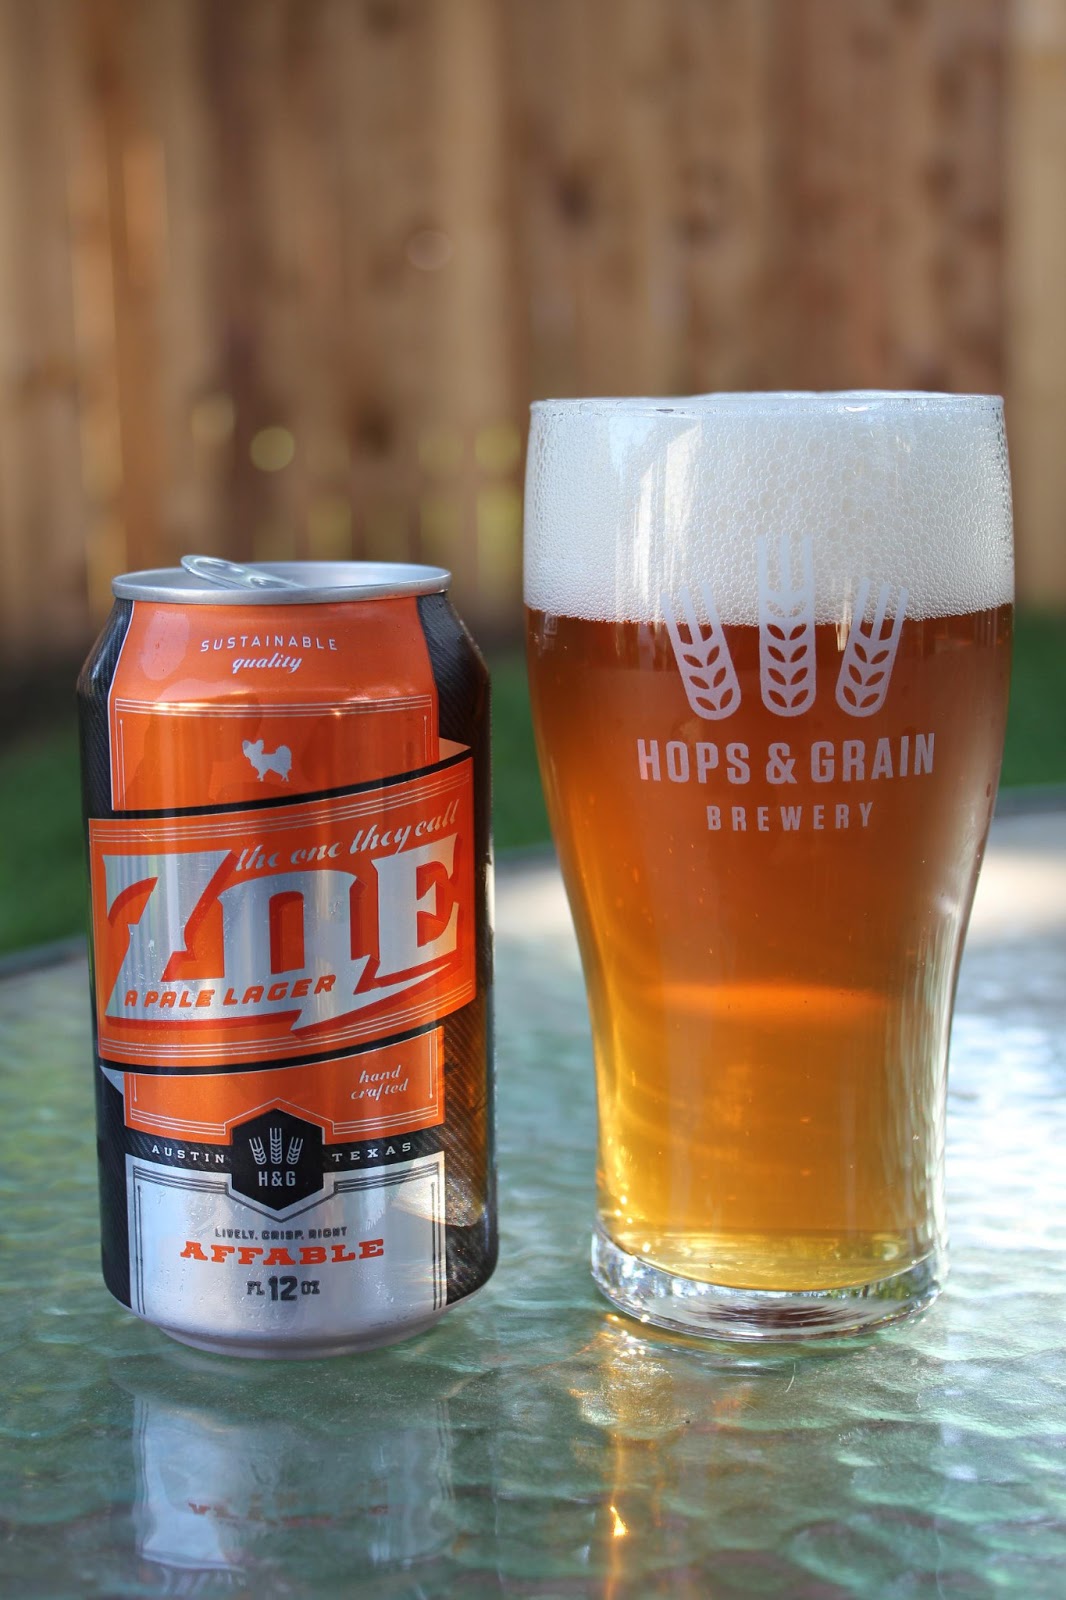 Hops & Grain The One They Call Zoe S